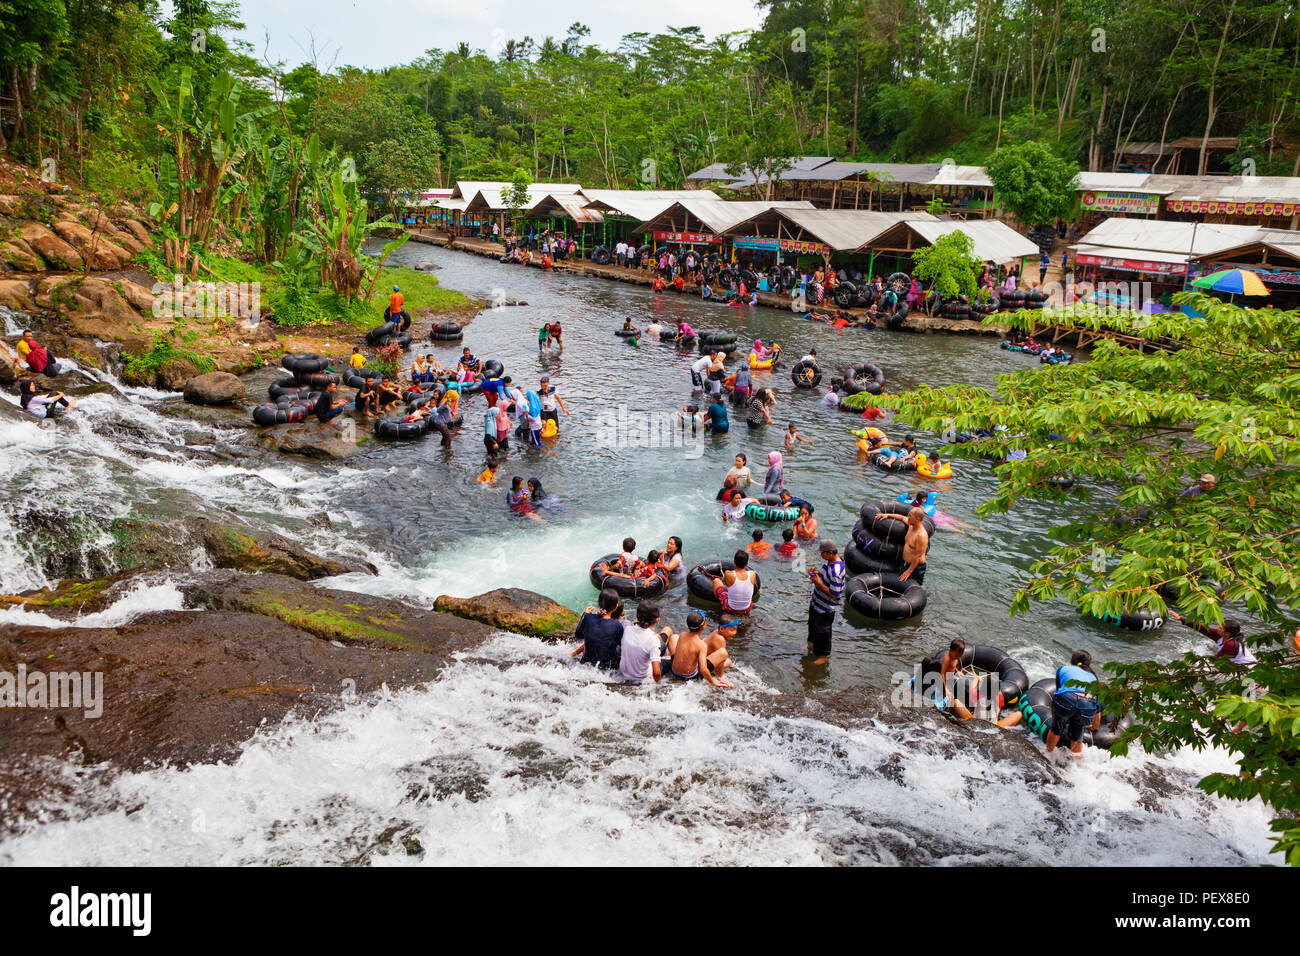 East Java, Indonesia - July 11, 2018: Sumber Maron - natural spring water spa with waterfall, swimming pools Popular place to visit for family holiday Stock Photo